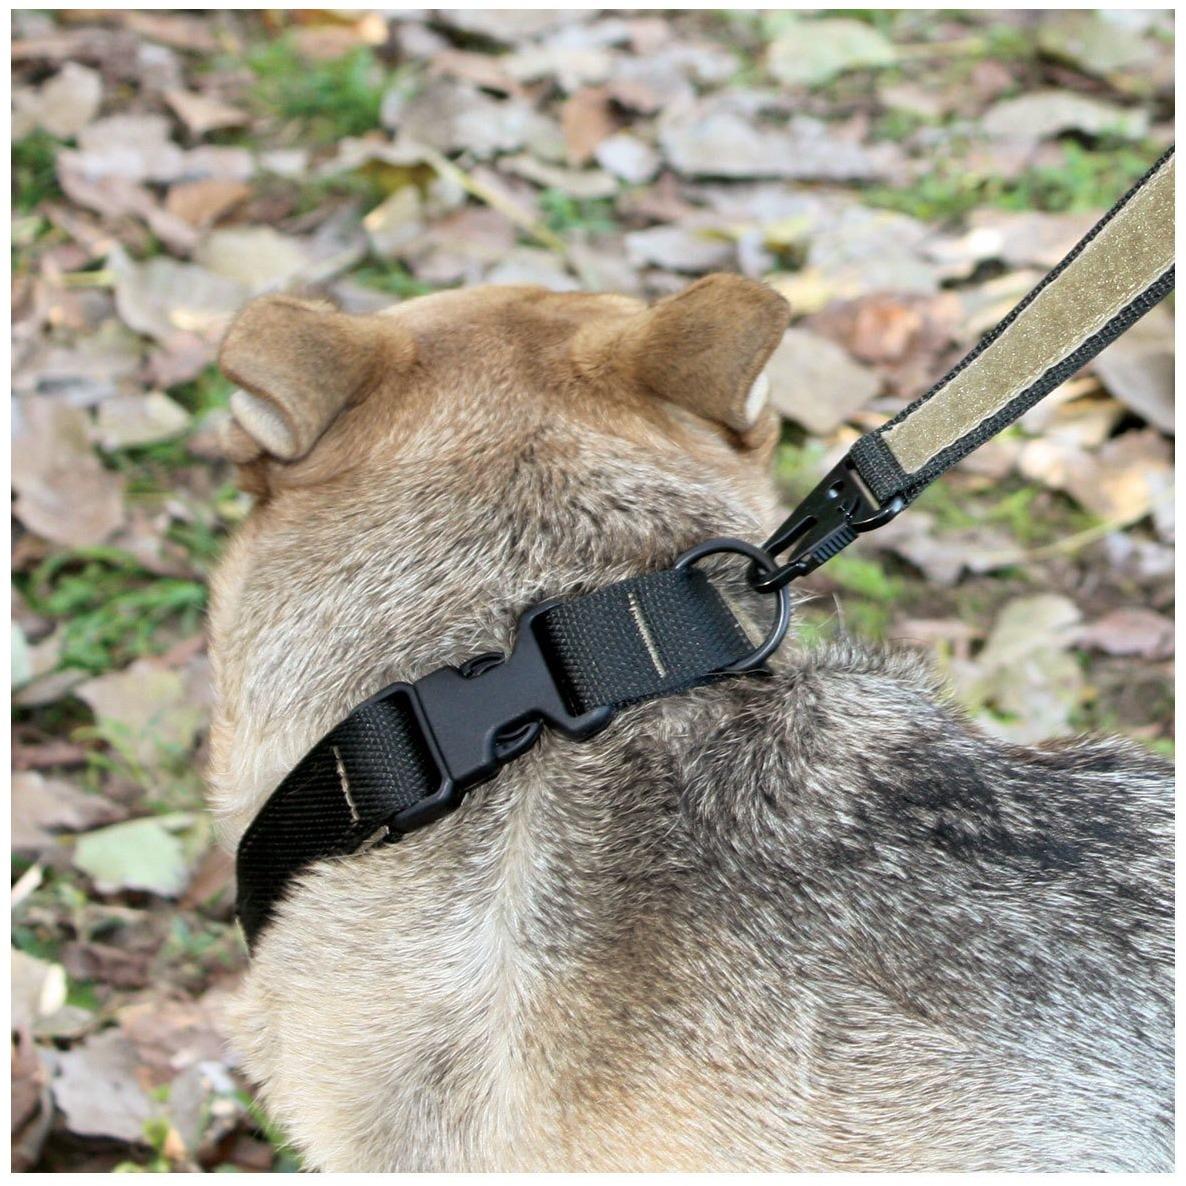 United States Tactical Tactical Gear United States Tactical Dog Collar with COBRA Buckle